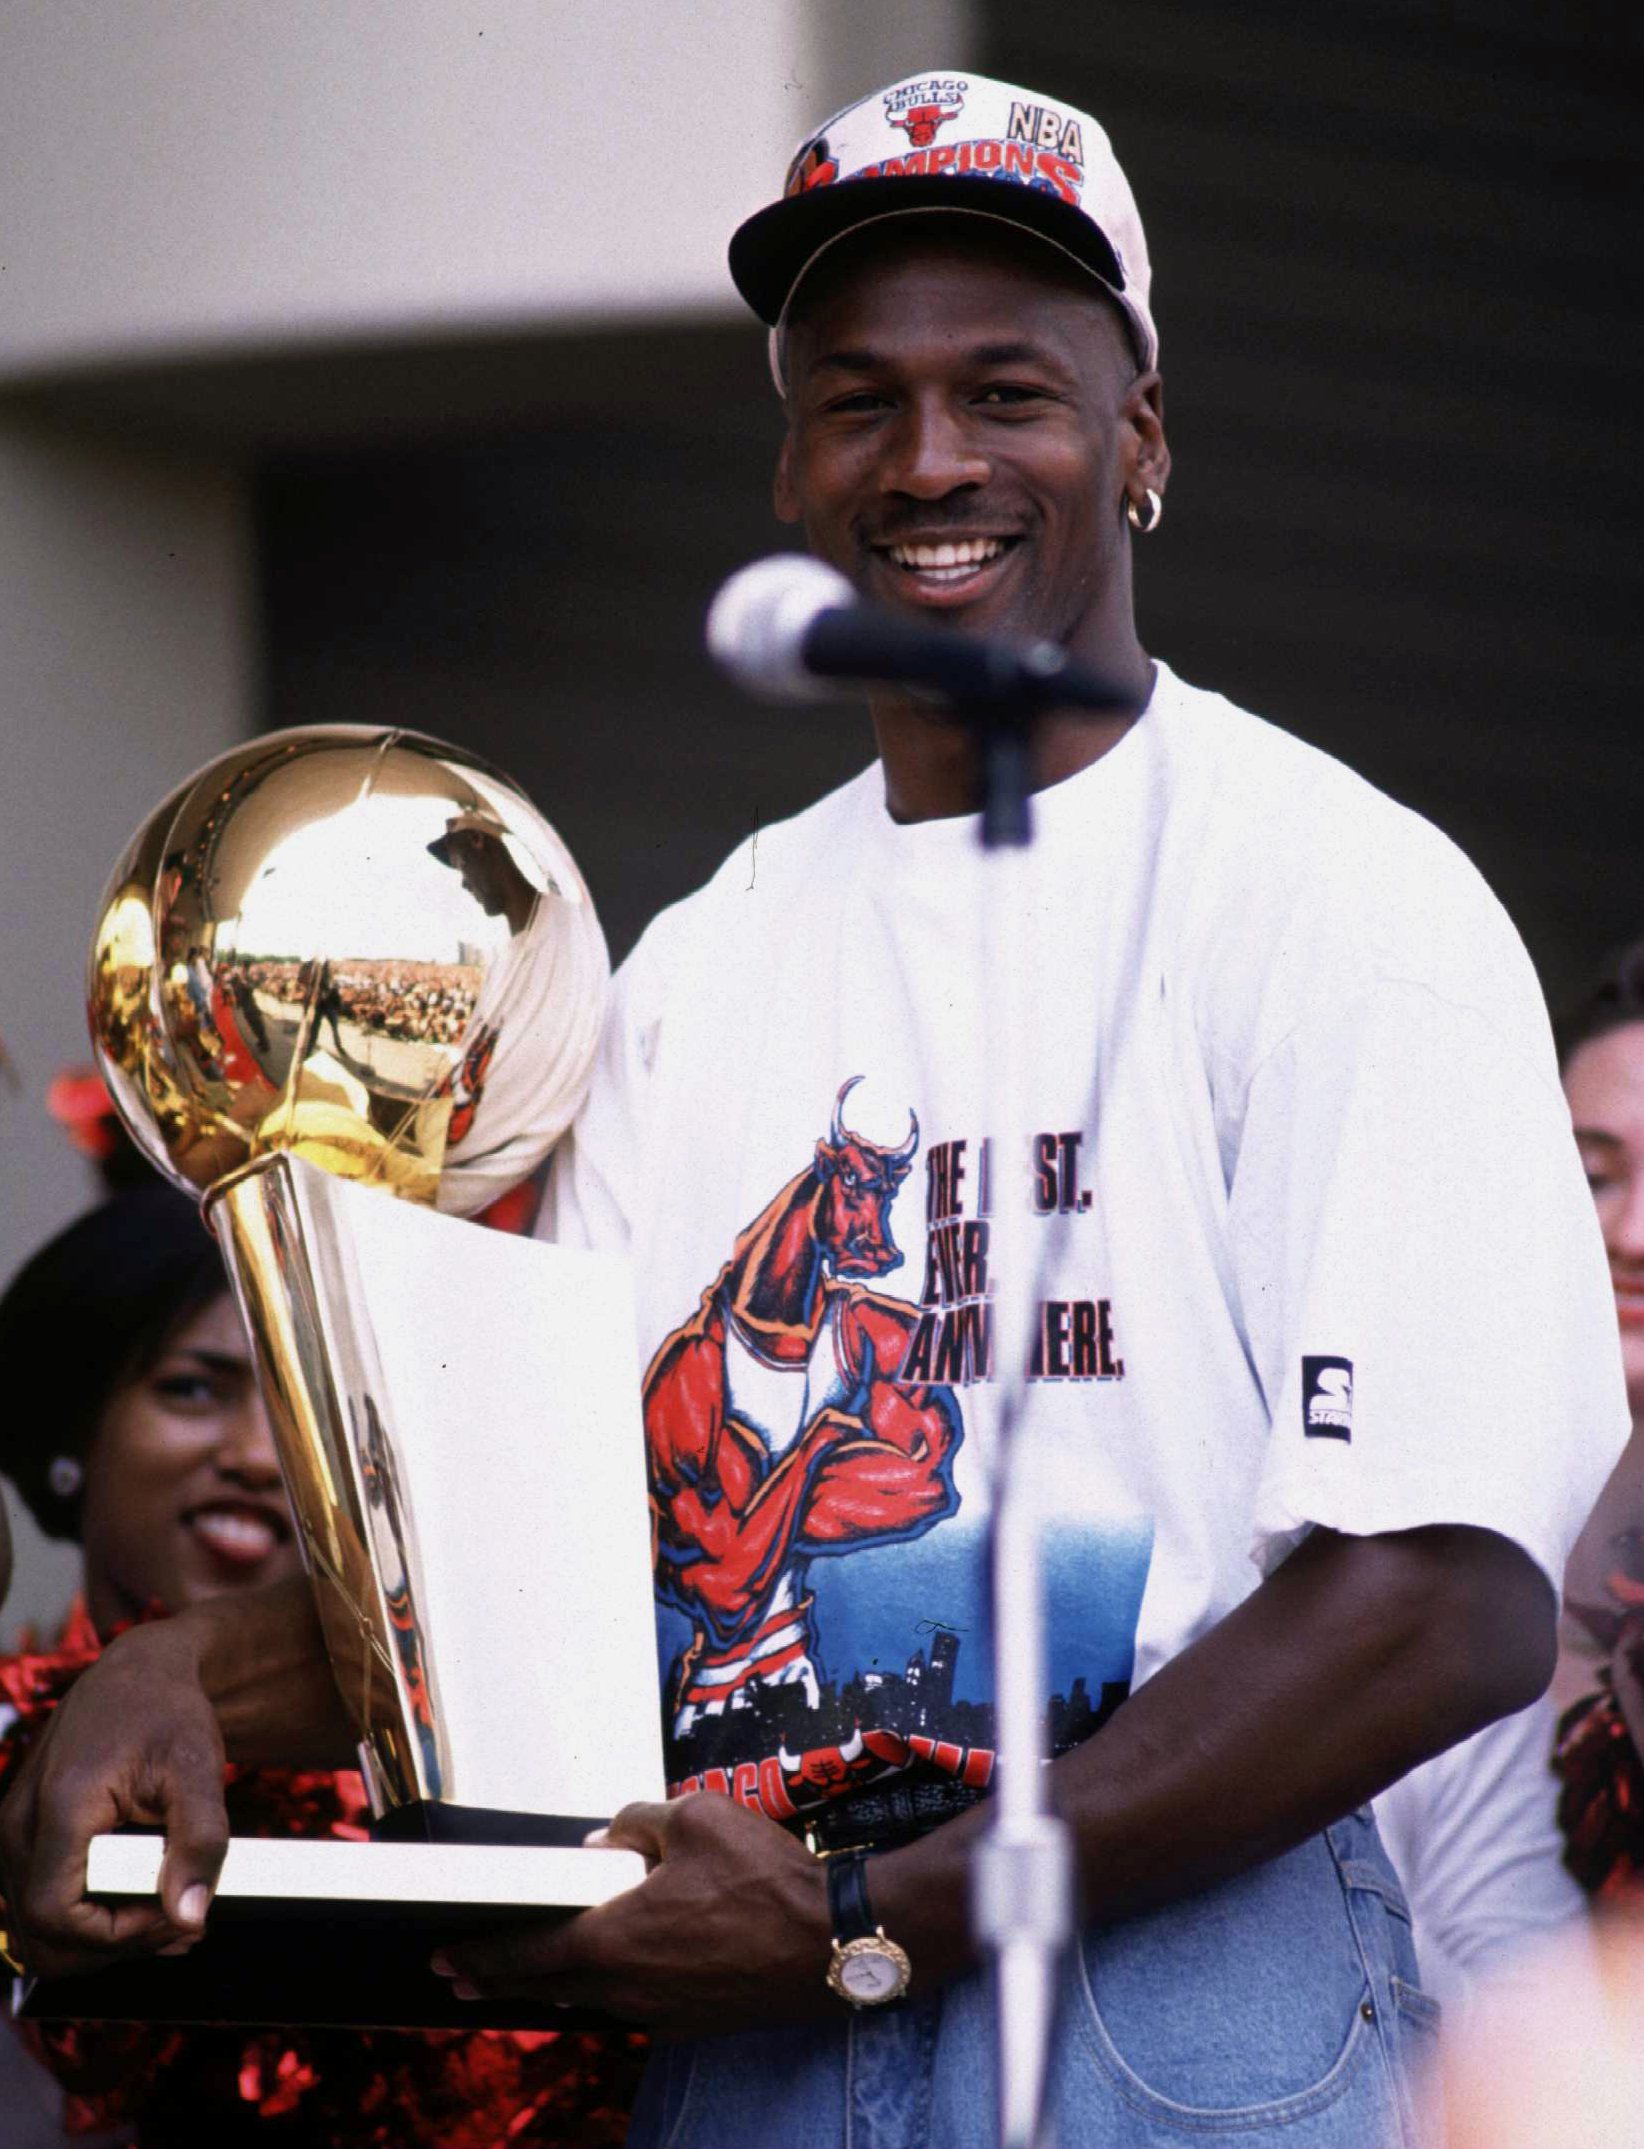 NBA Finals 2011: The 18 Most Dominant Championship Teams of All Time